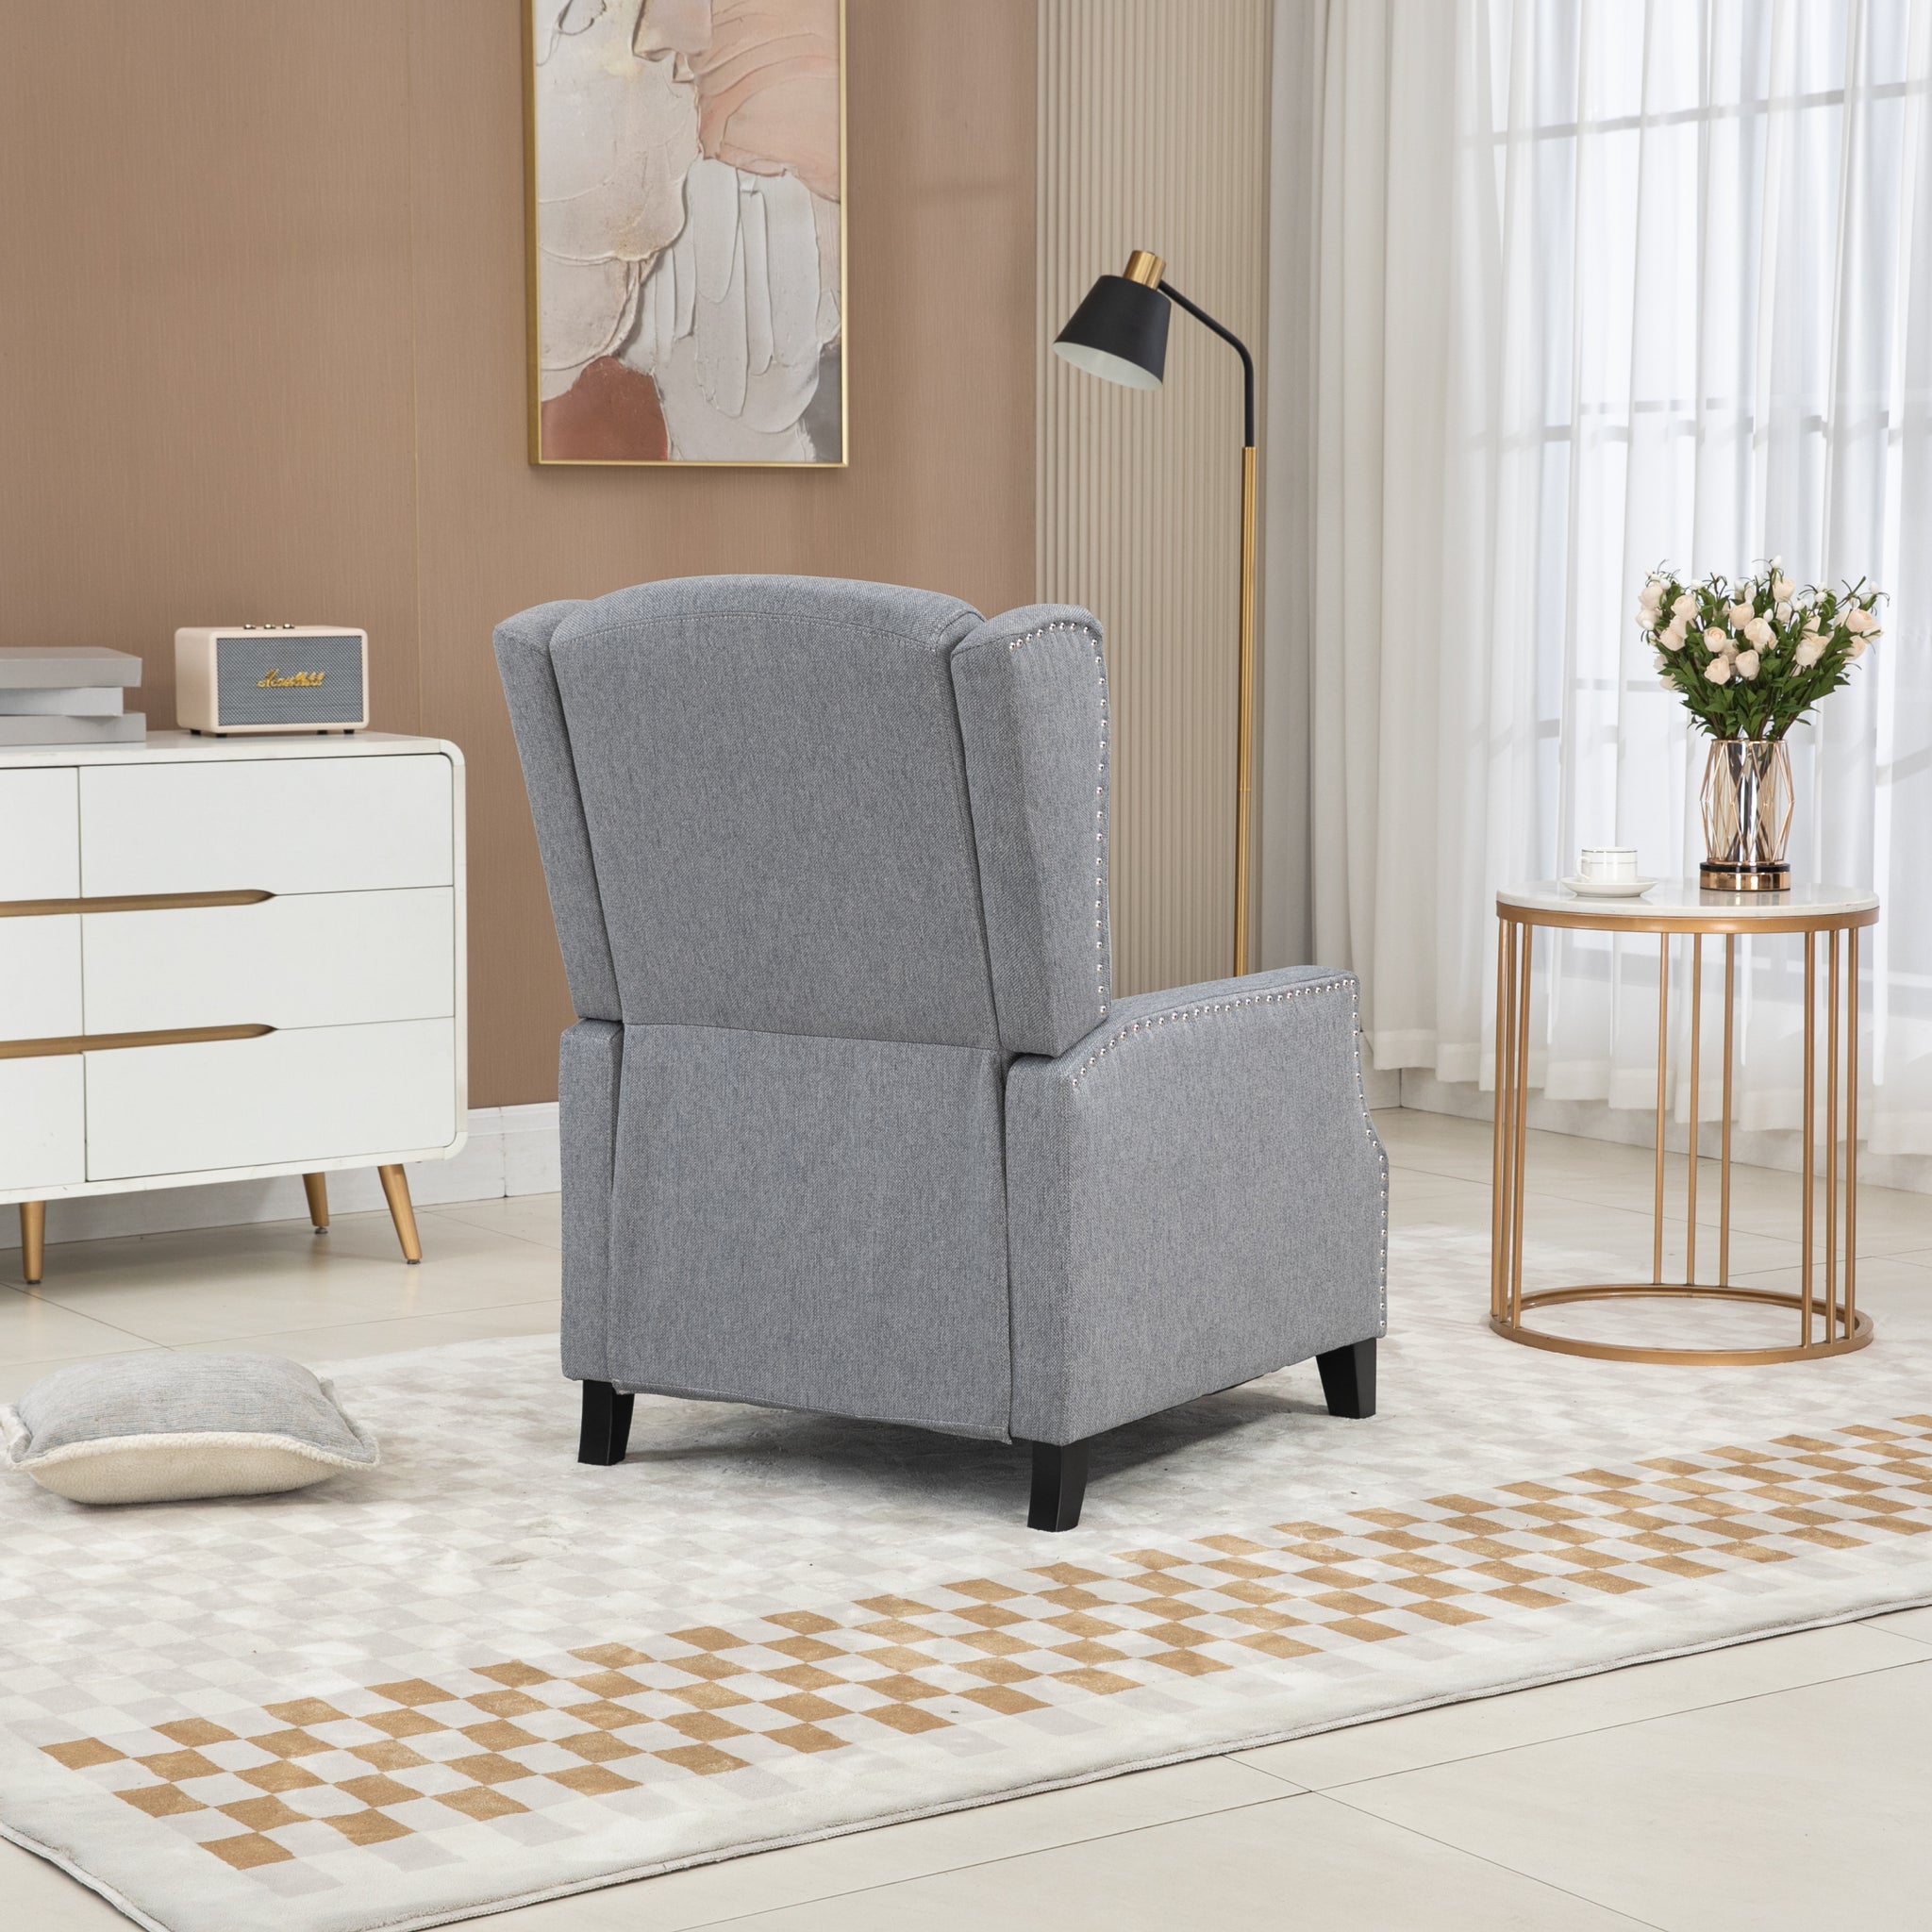 COOLMORE Modern Comfortable Upholstered leisure chair gray-linen